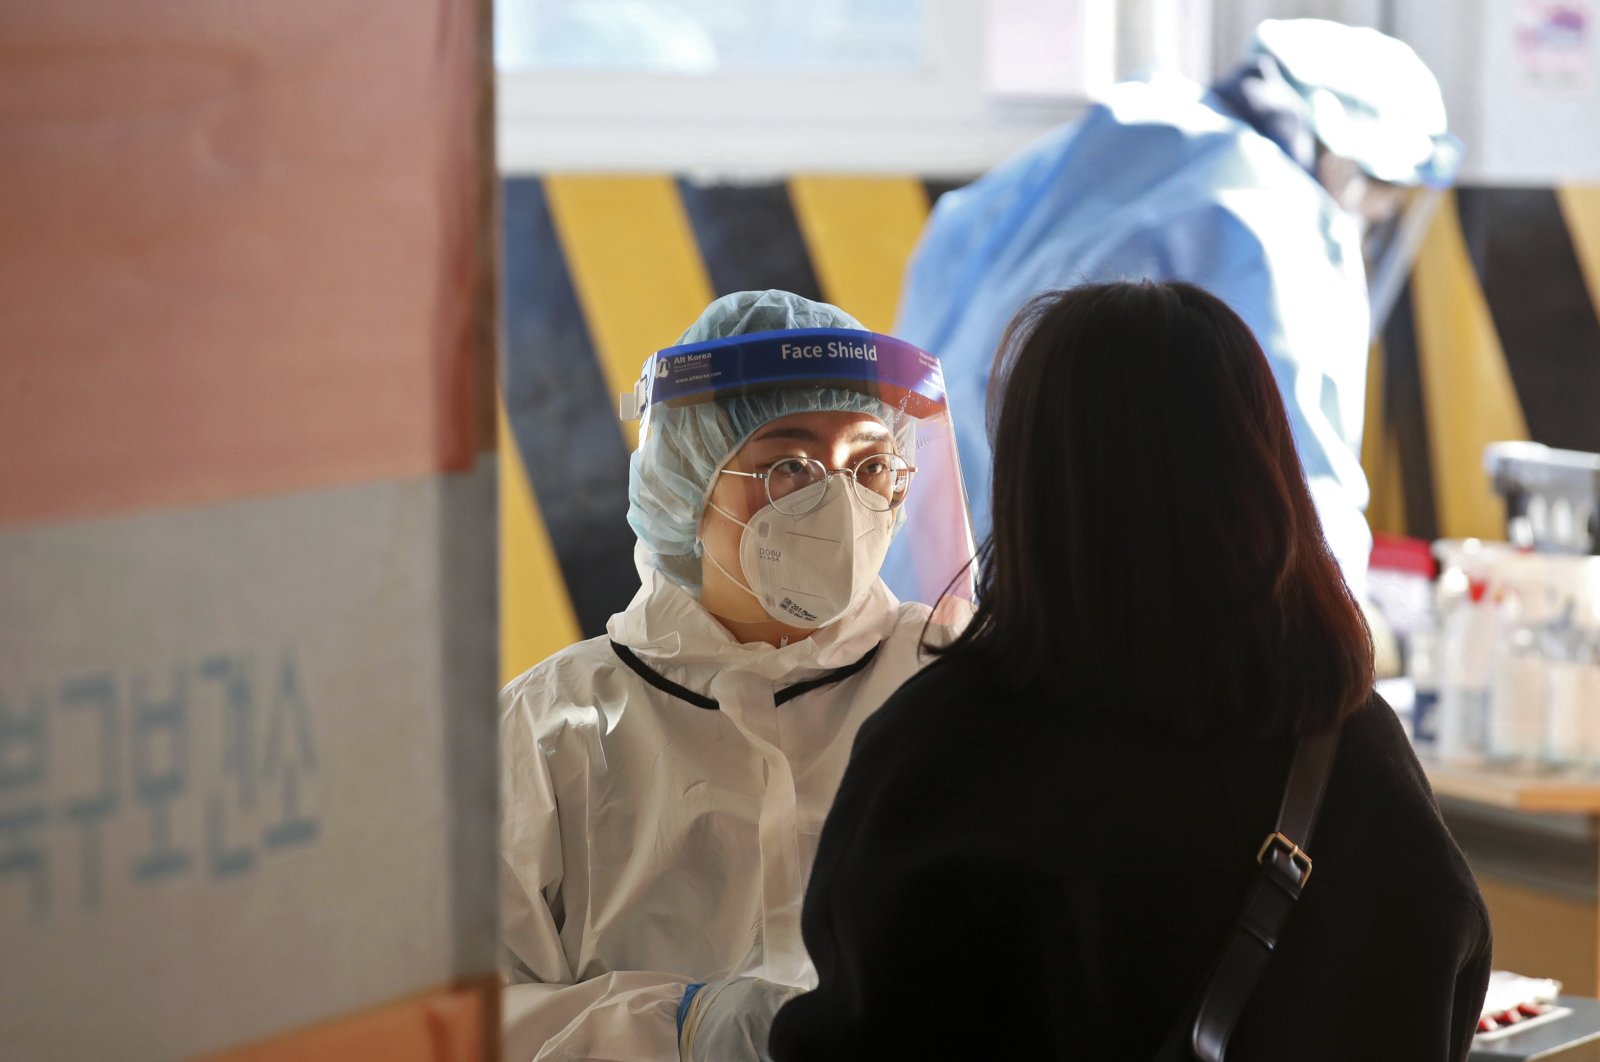 A medical worker wearing protective gear takes a sample from a woman at a temporary screening clinic for the coronavirus in Gwangju, South Korea, Jan. 3, 2022. (AP Photo)